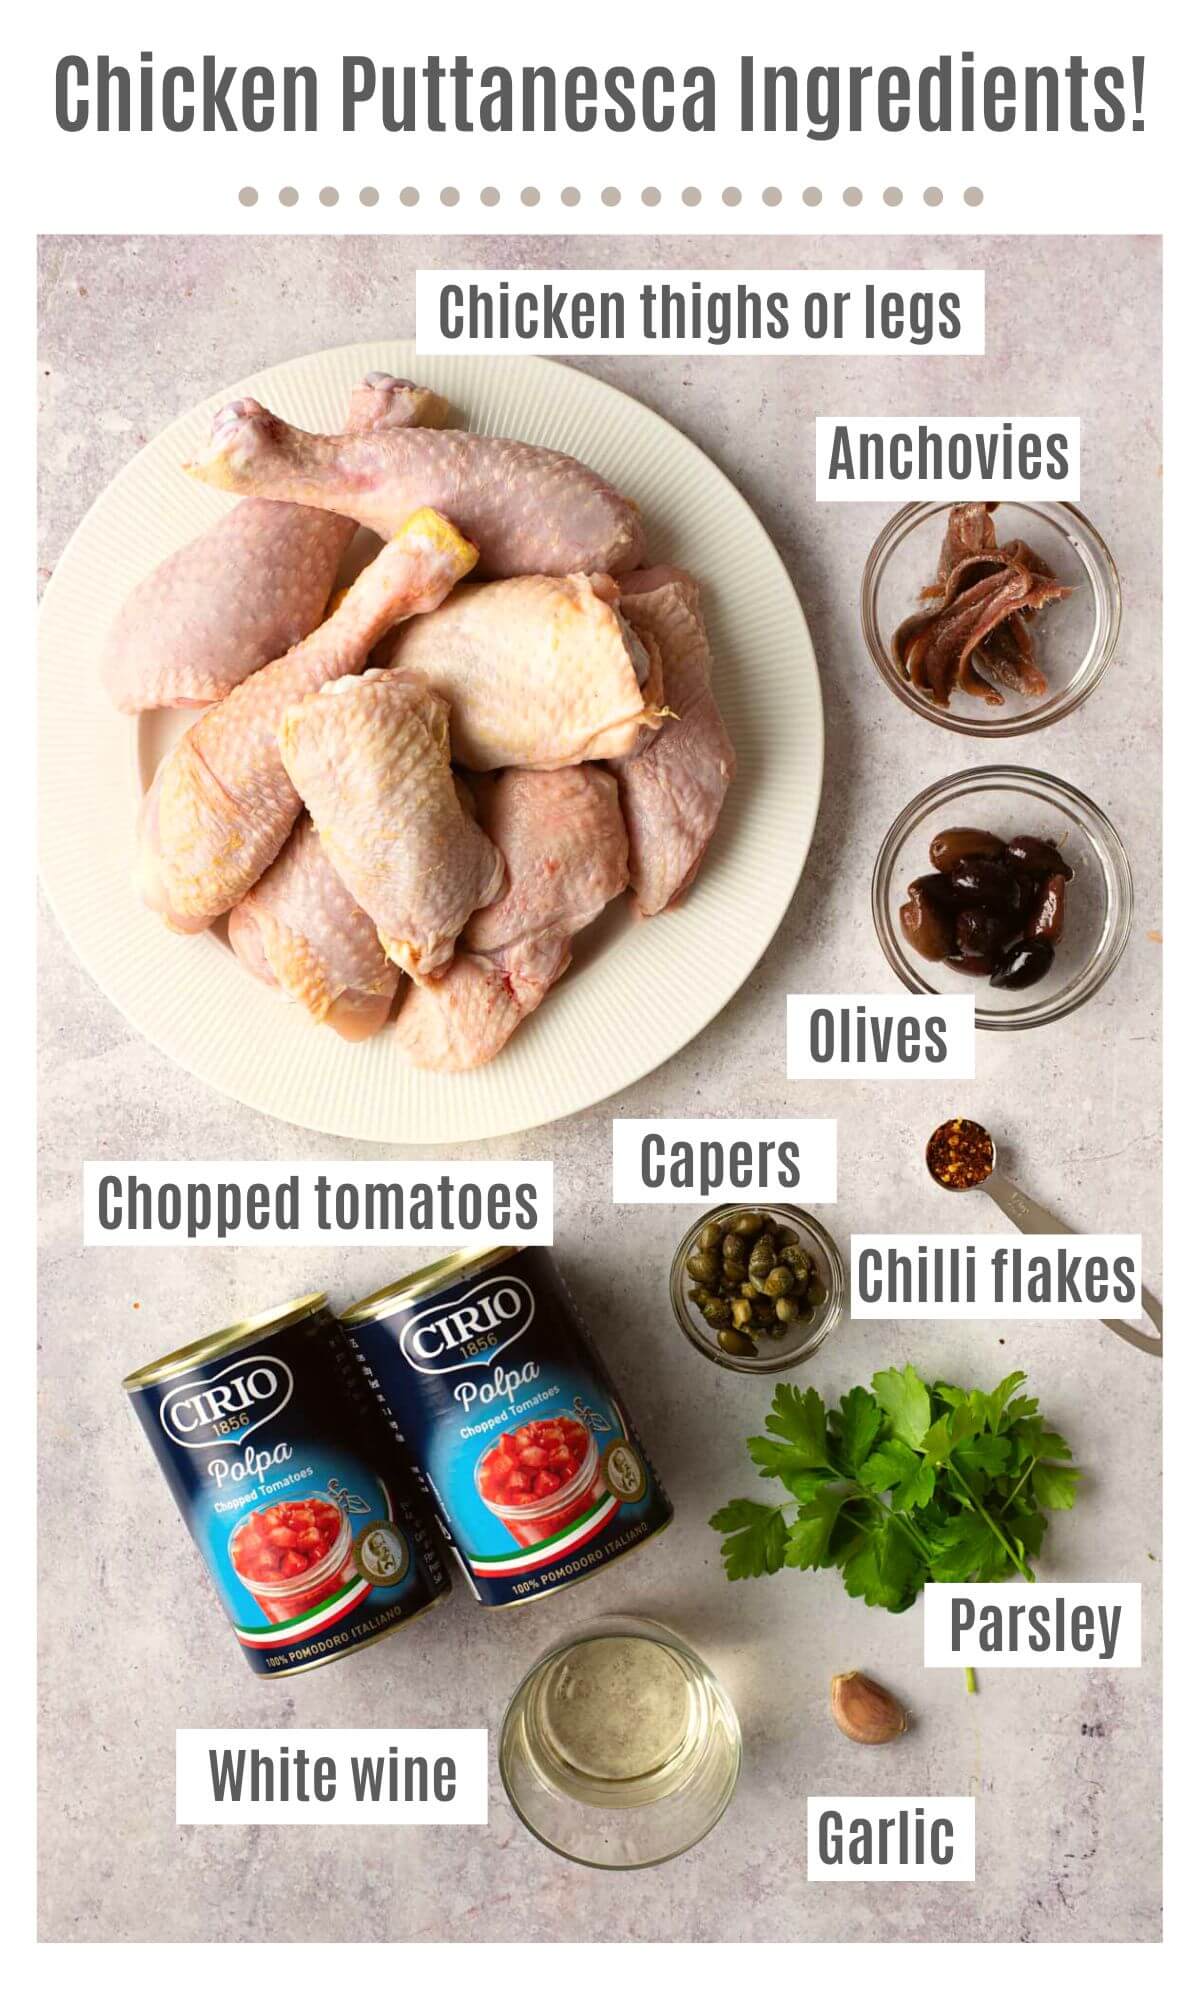 An overhead shot of labelled ingredients needed to make chicken puttanesca; chicken thighs or legs, anchovies, olives, capers, chilli flakes, chopped tomatoes, parsley, garlic and white wine.